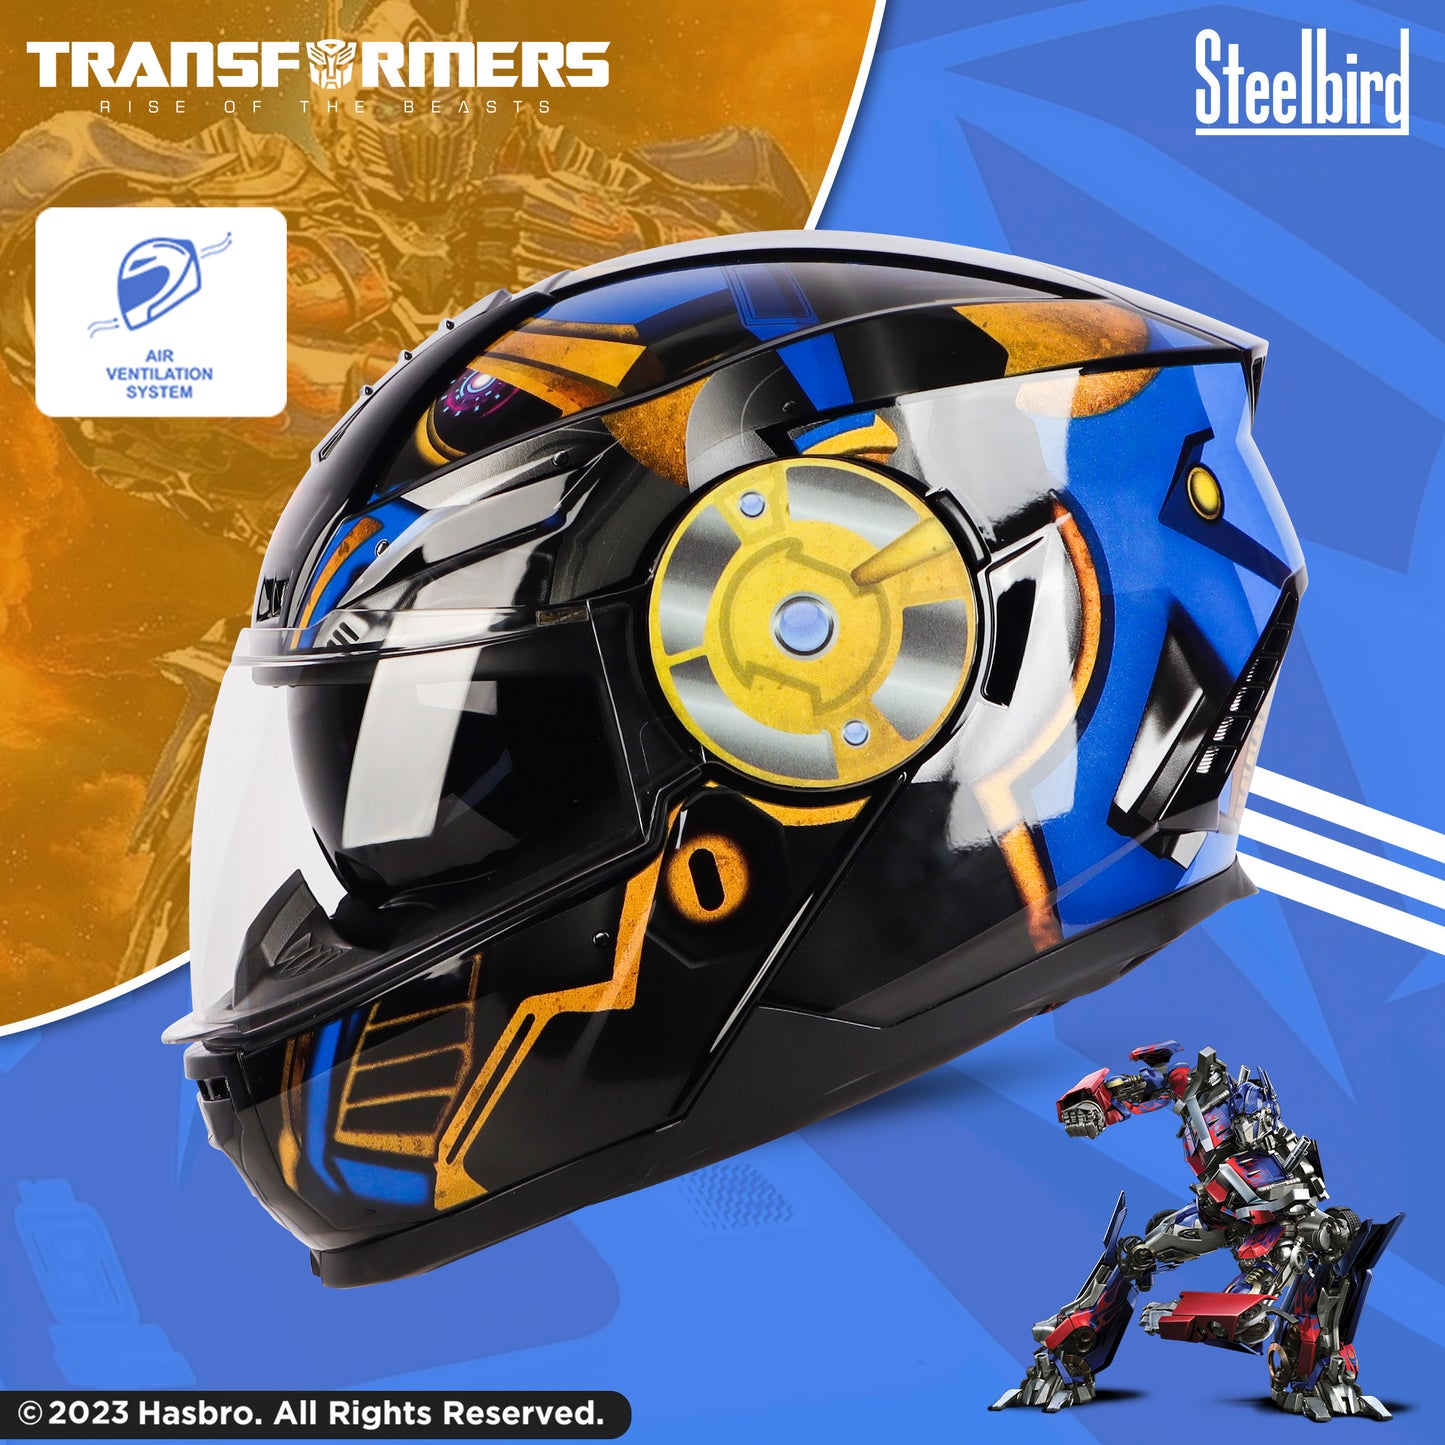 Steelbird SBH-40 Transformers Optimus Prime ISI Certified Full Face Graphic Helmet for Men and Women with Inner Smoke Sun Shield (Glossy Black Gold)